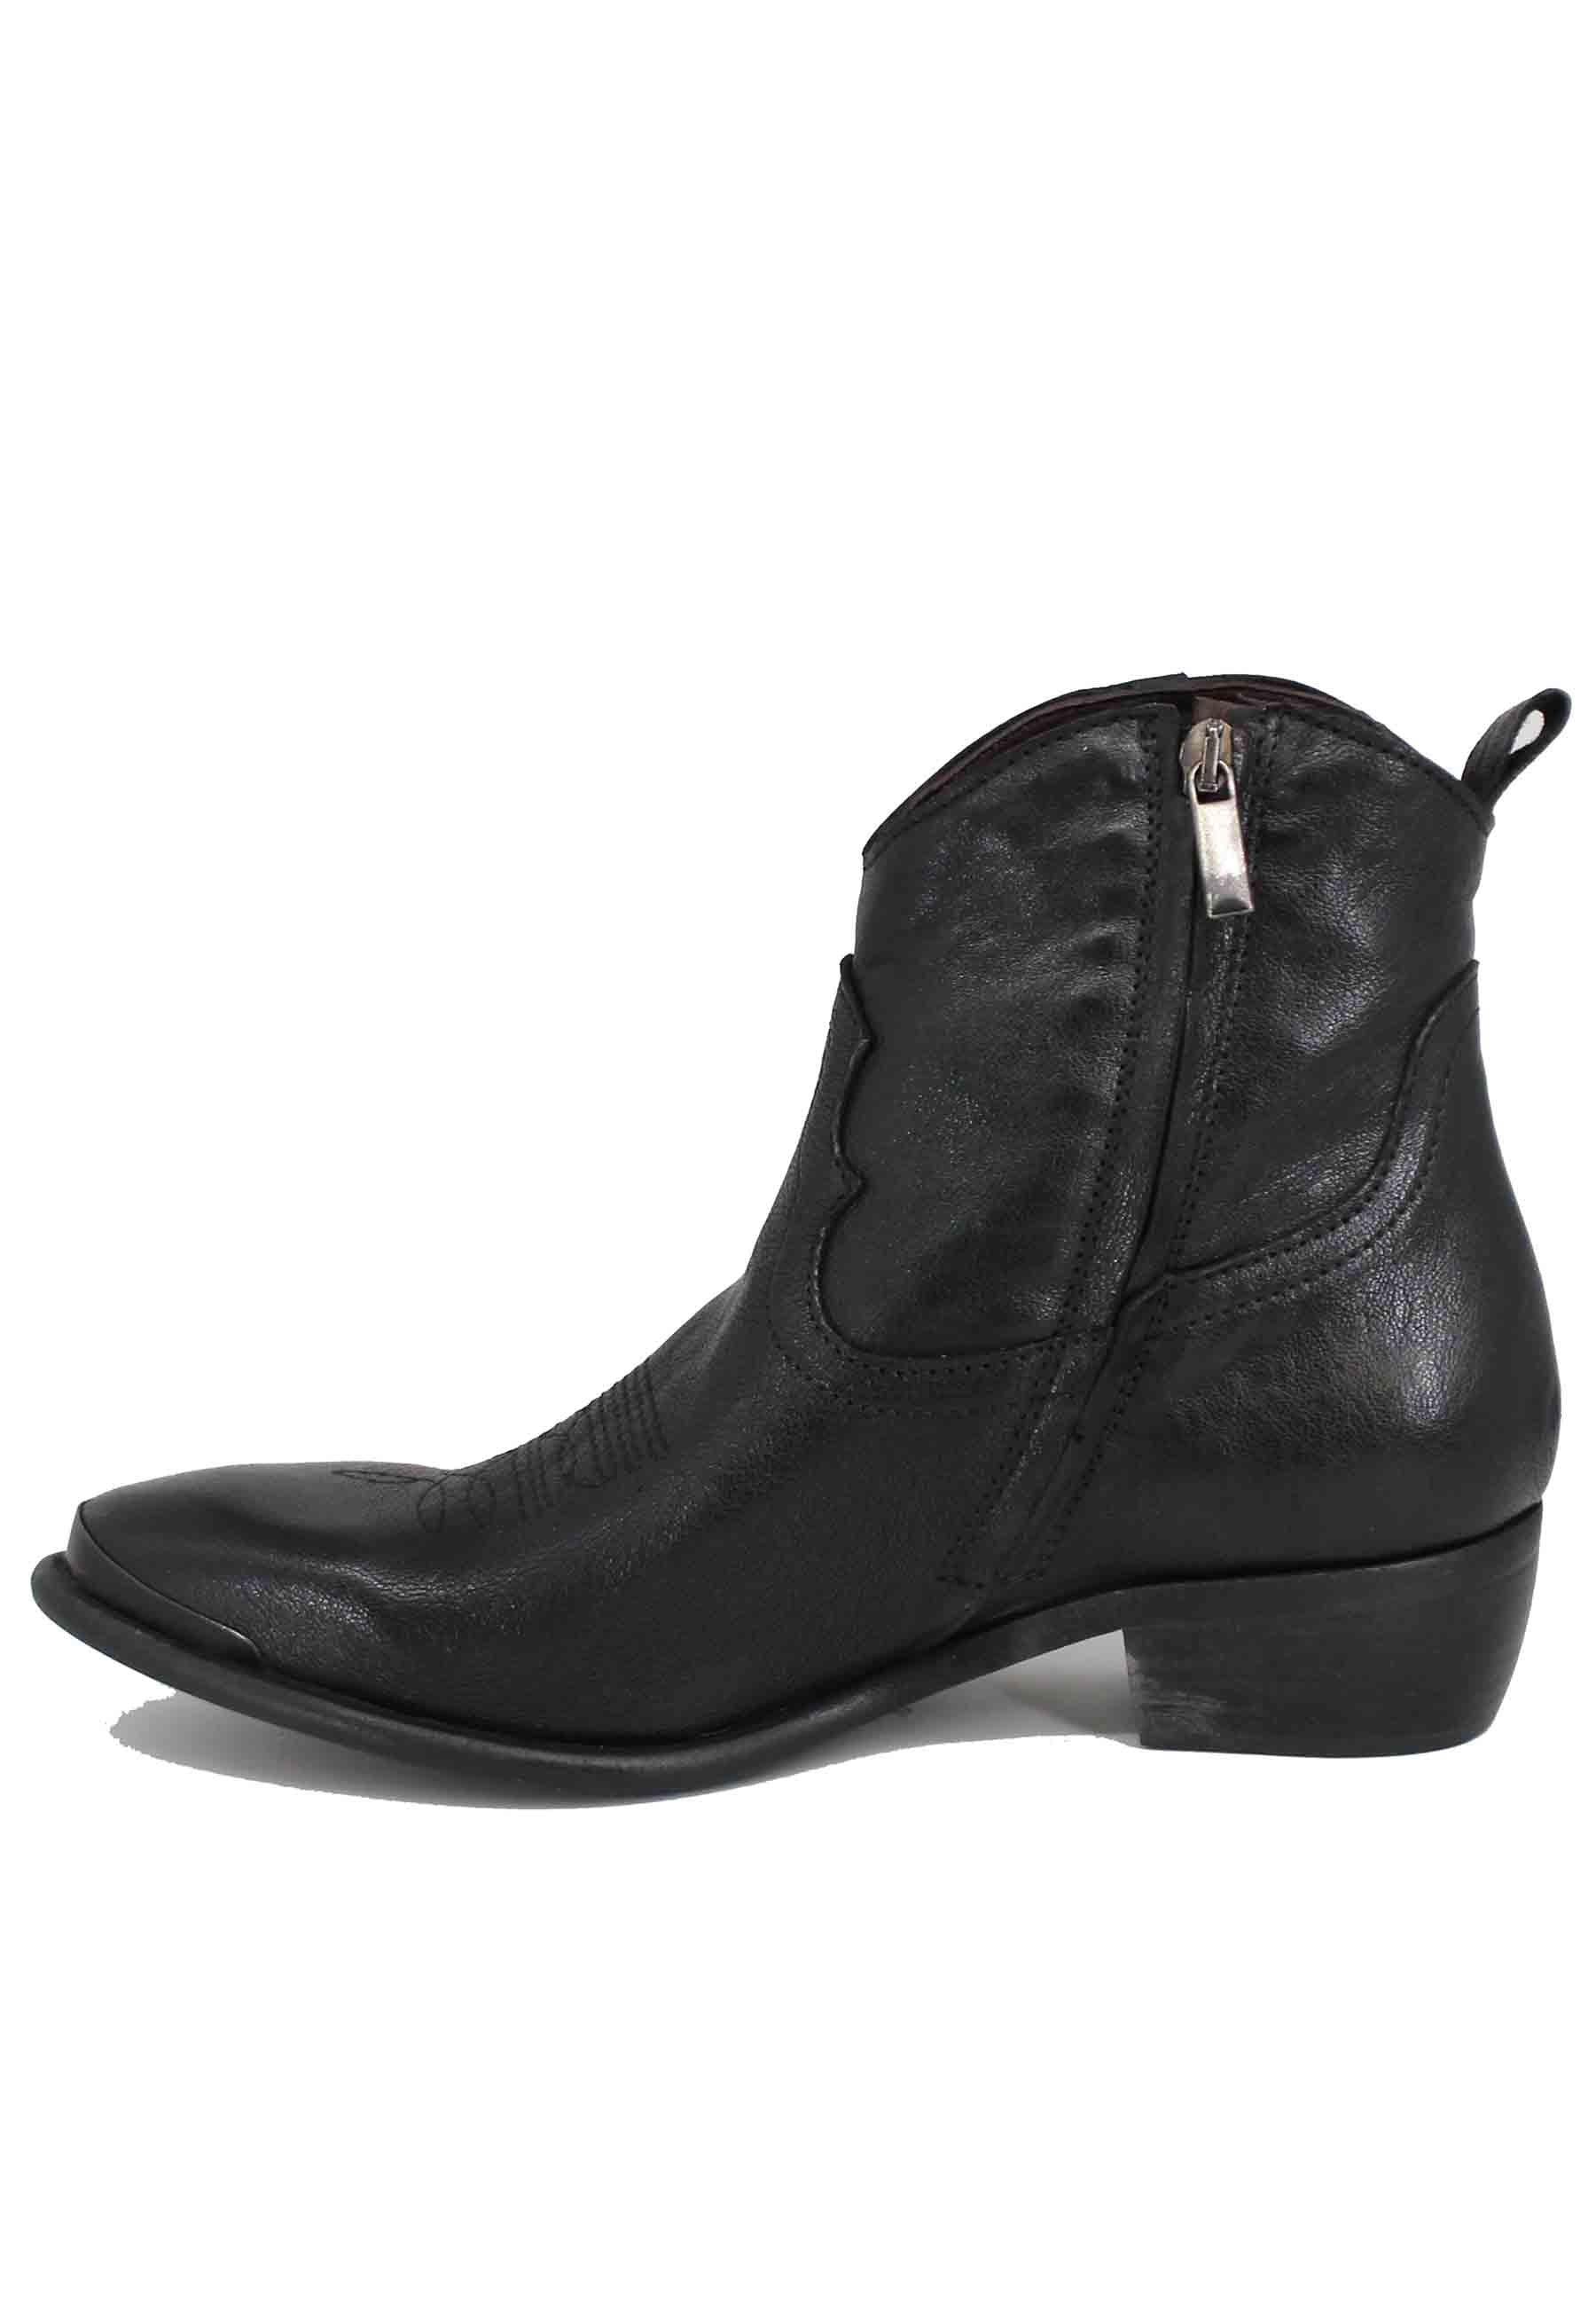 Women's Texan boots in black leather with toe cap